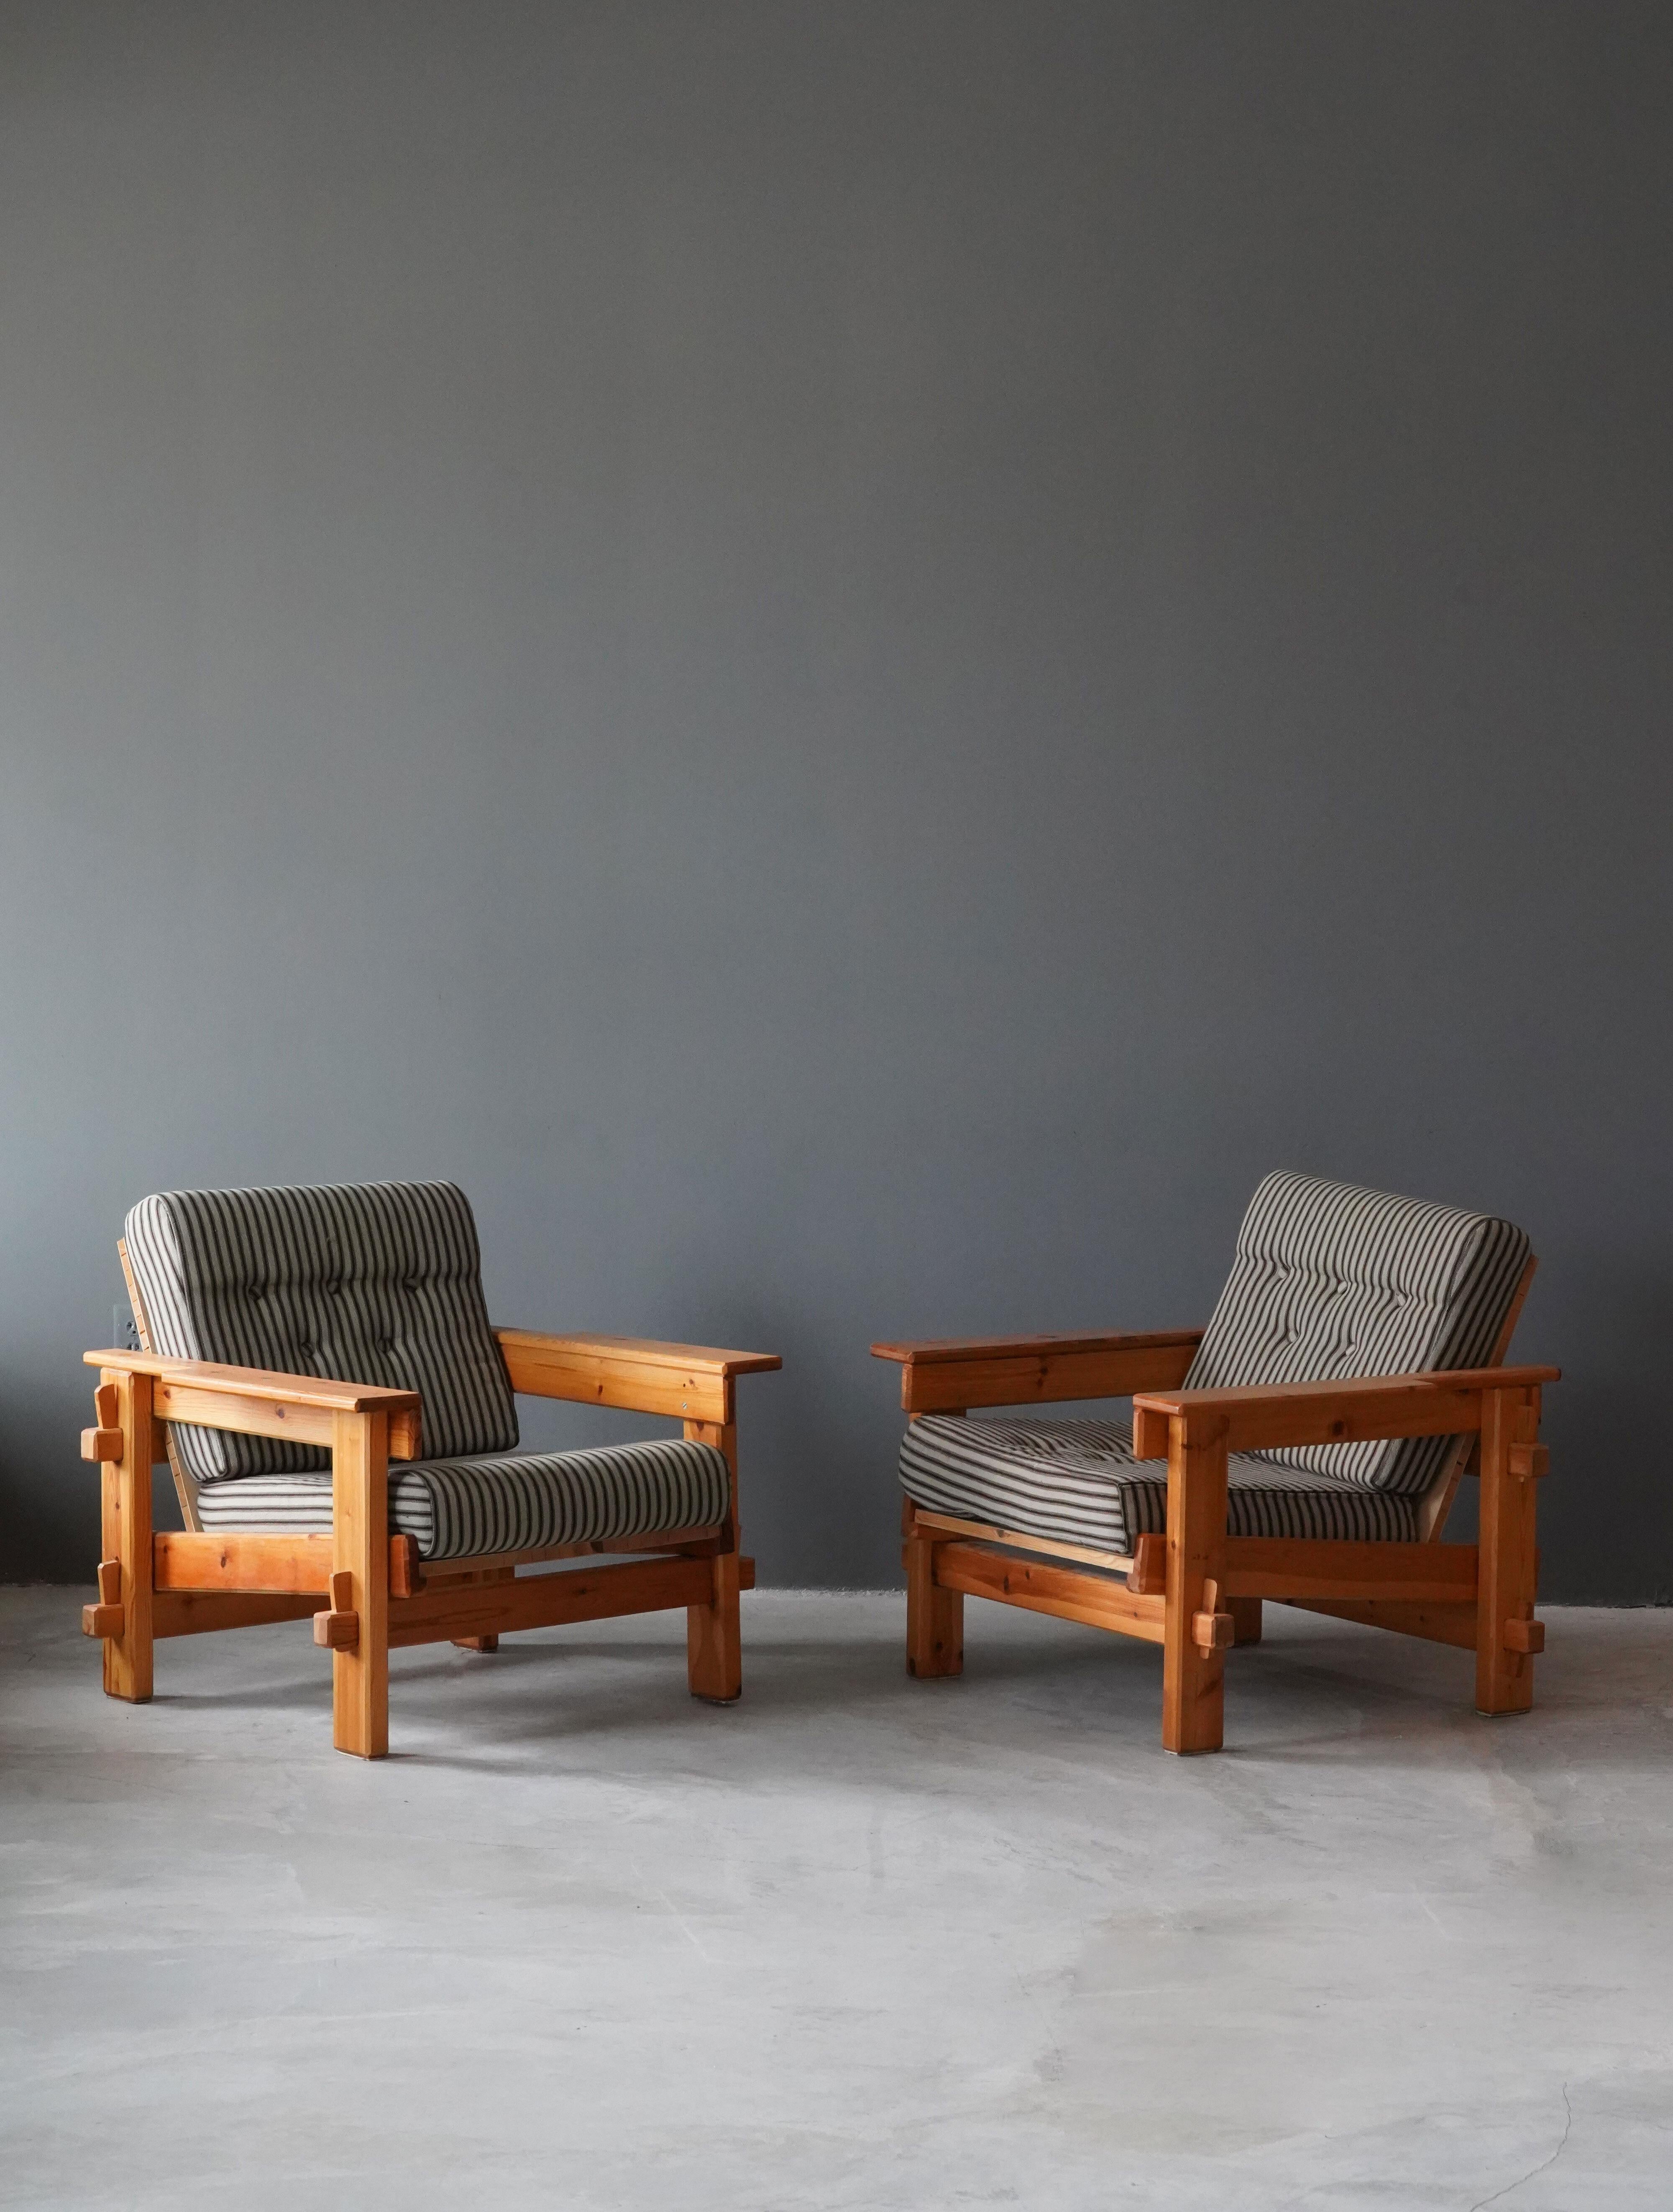 A pair of custom made lounge chairs, designed and produced by Matti Suuronen, Artist's Studio, Finland, 1984.

In highly functional style with revealed joinery. Features it's original 